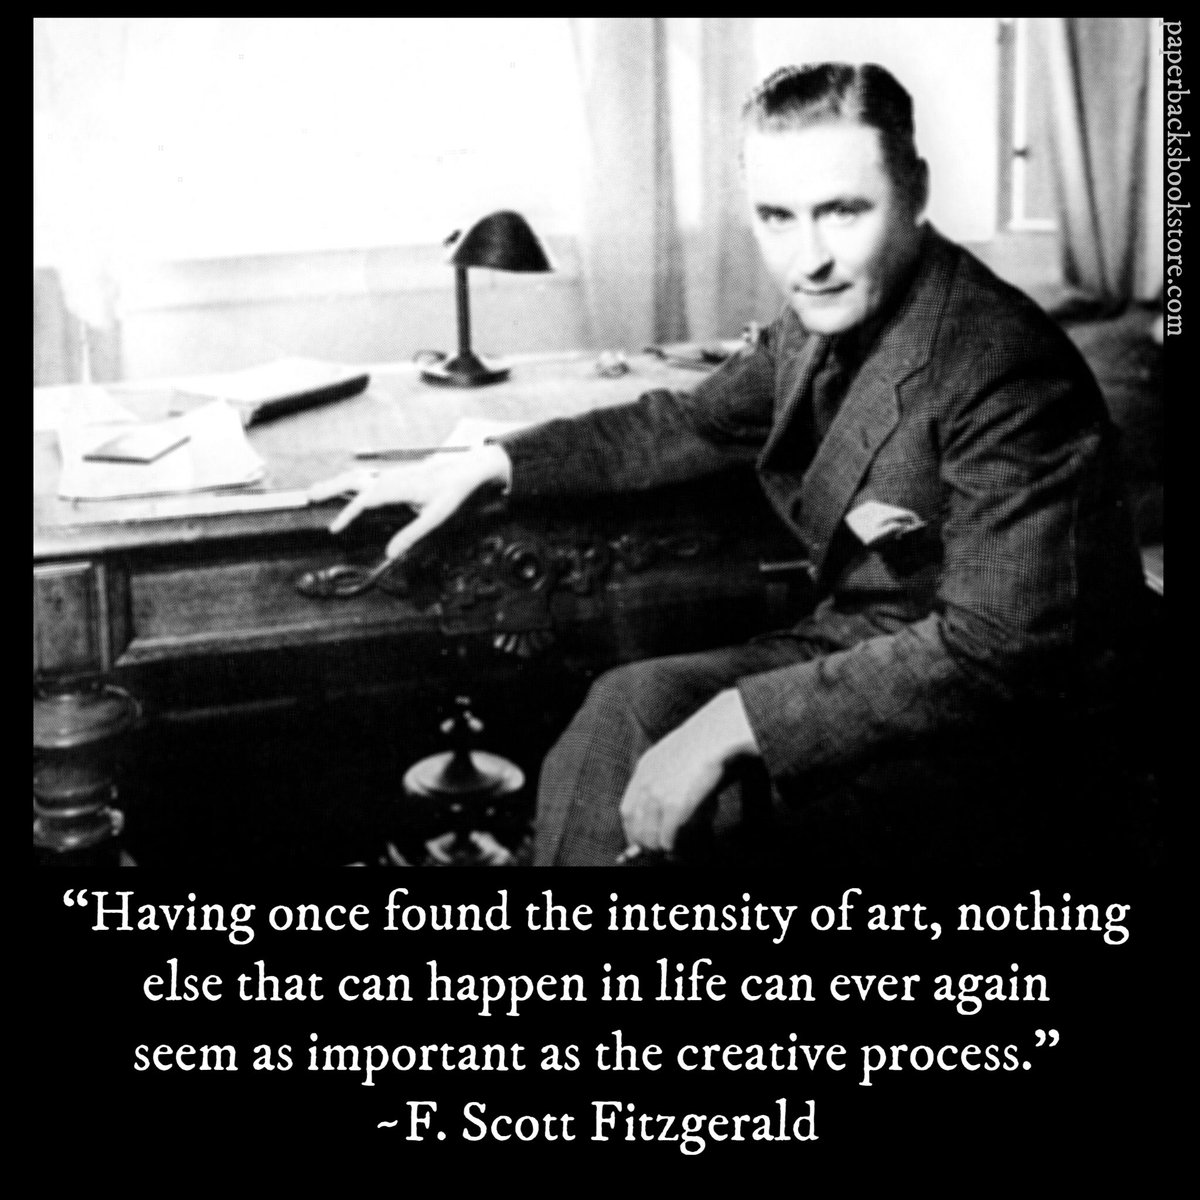 🖤✒️📖
“Having once found the intensity of art, nothing else that can happen in life can ever again seem as important as the creative process.” ~F. Scott Fitzgerald

#creativeprocess #creativity #FScottFitzgerald #onwriting #writer #readingandart #storyteller #writers #writing